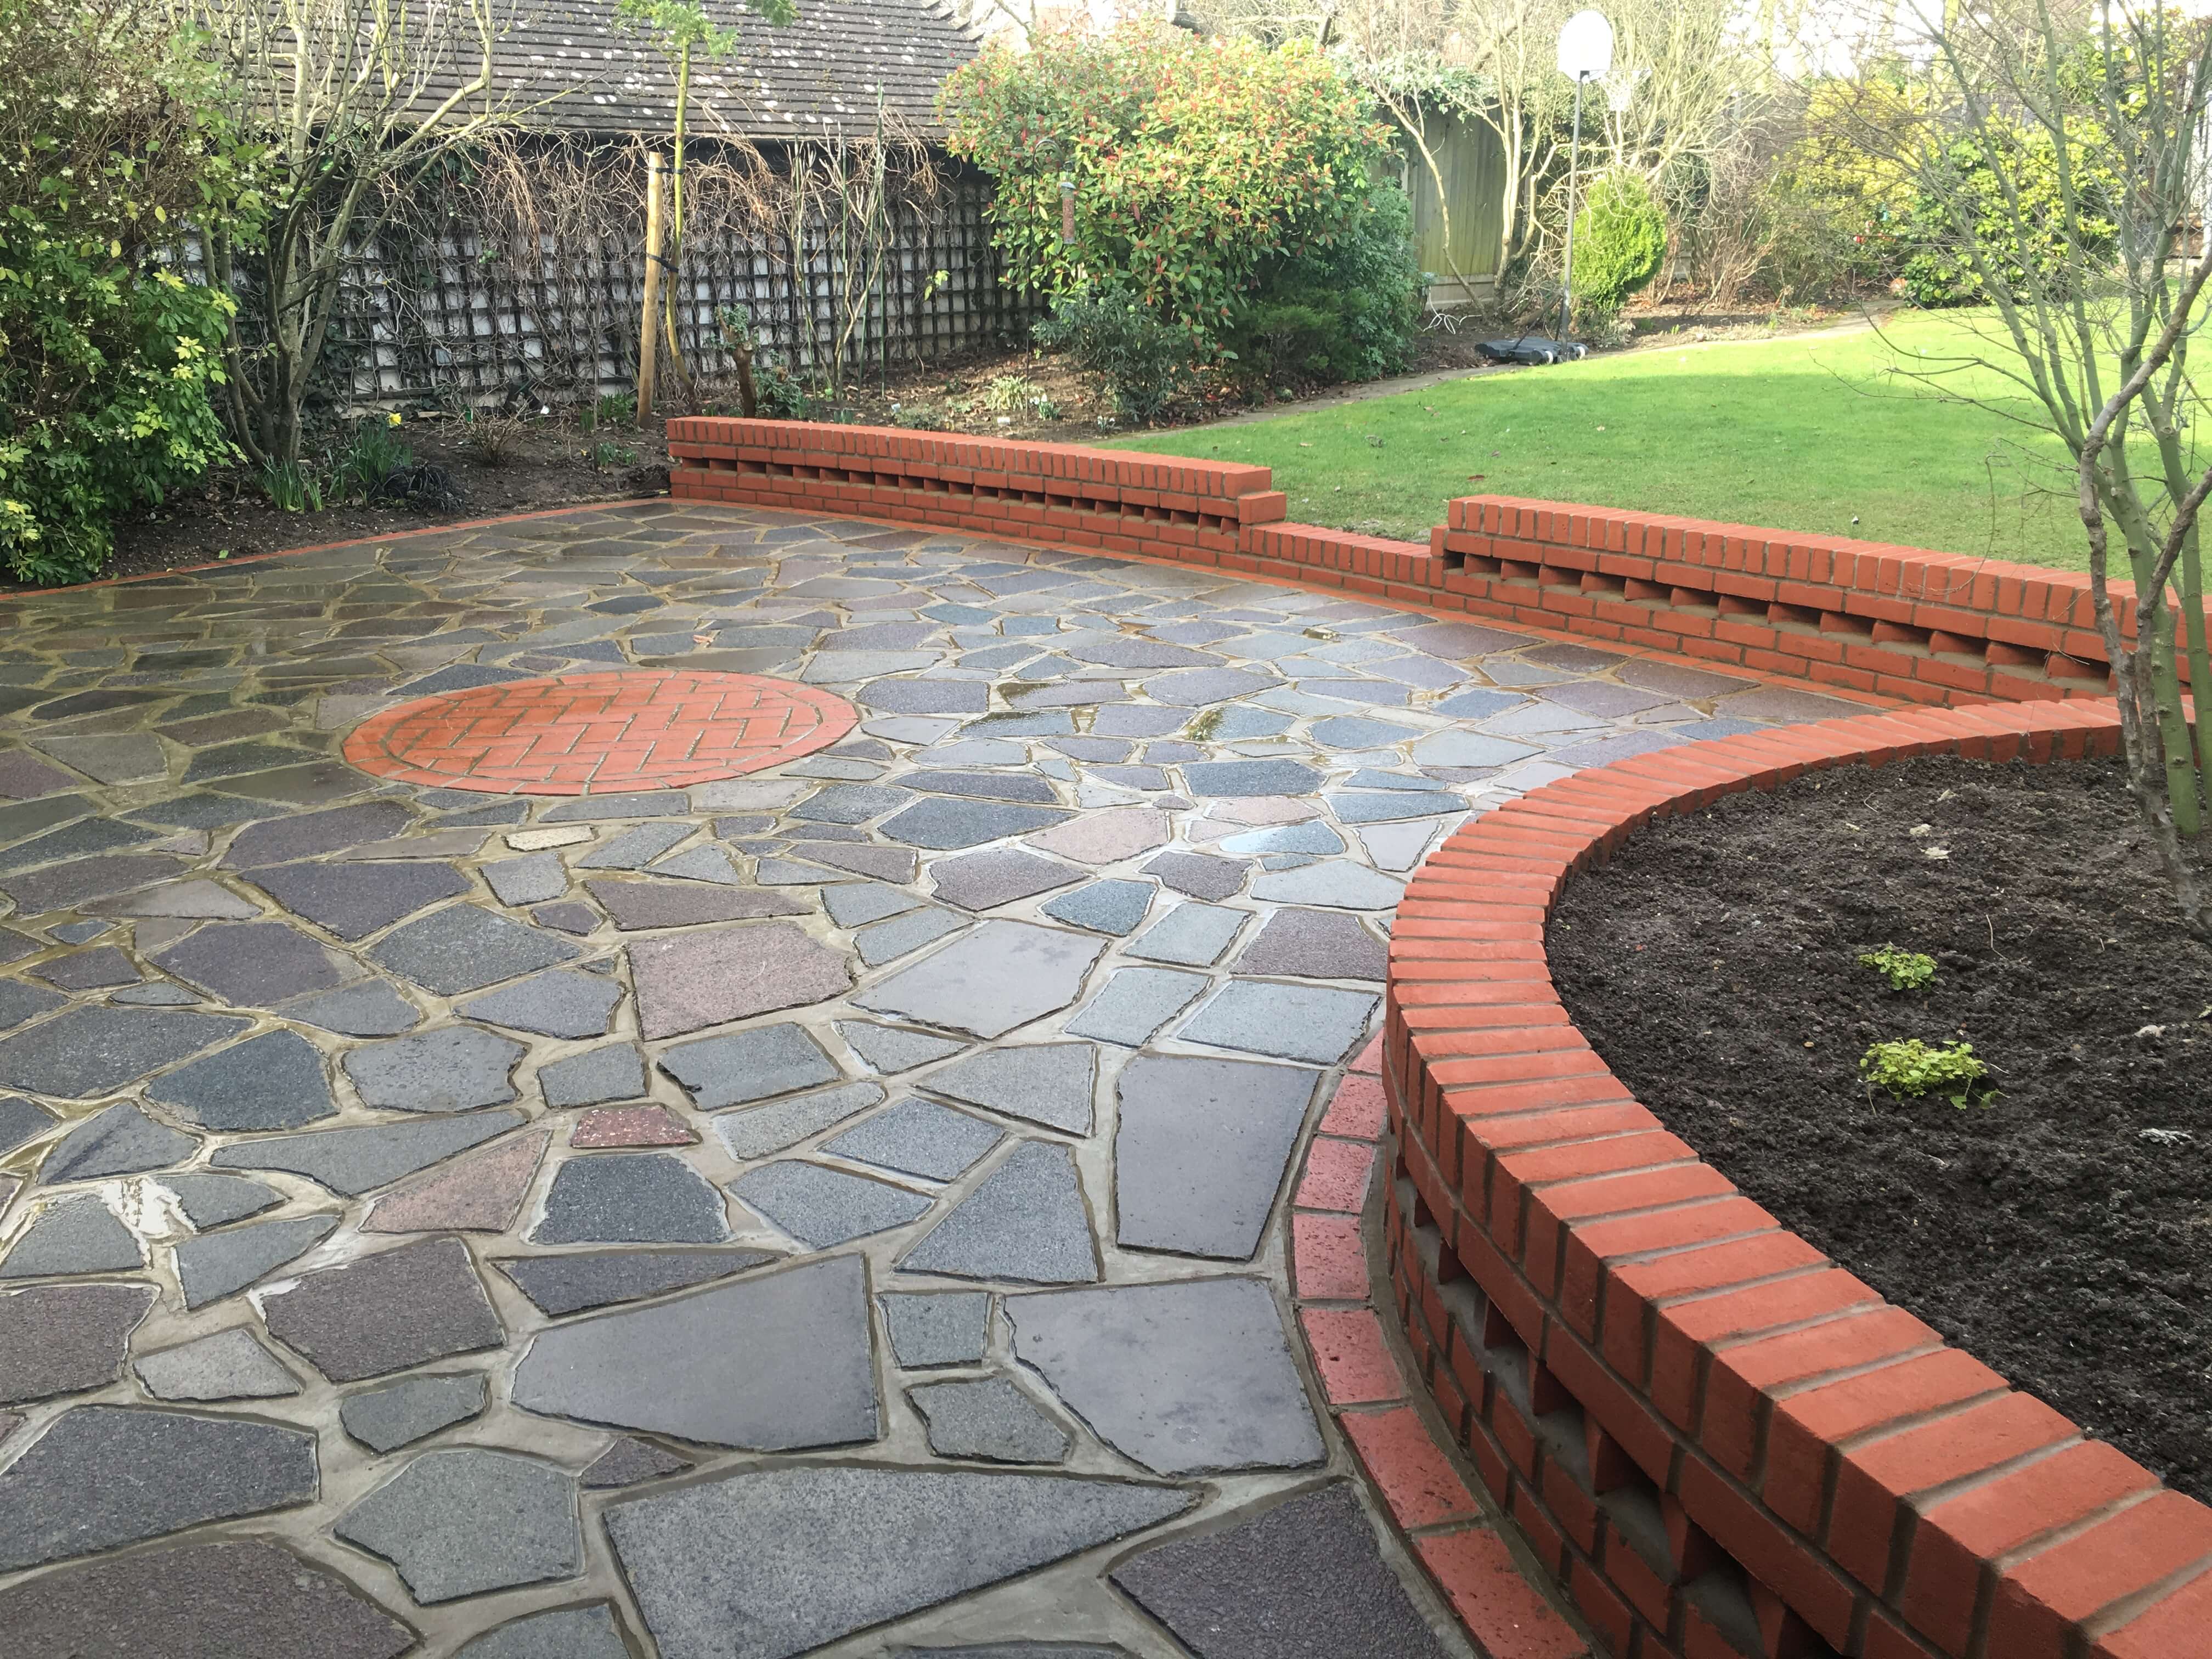 Patios & Driveways In Southend, Rochford, Brentwood, Benfleet & Surrounding Areas.